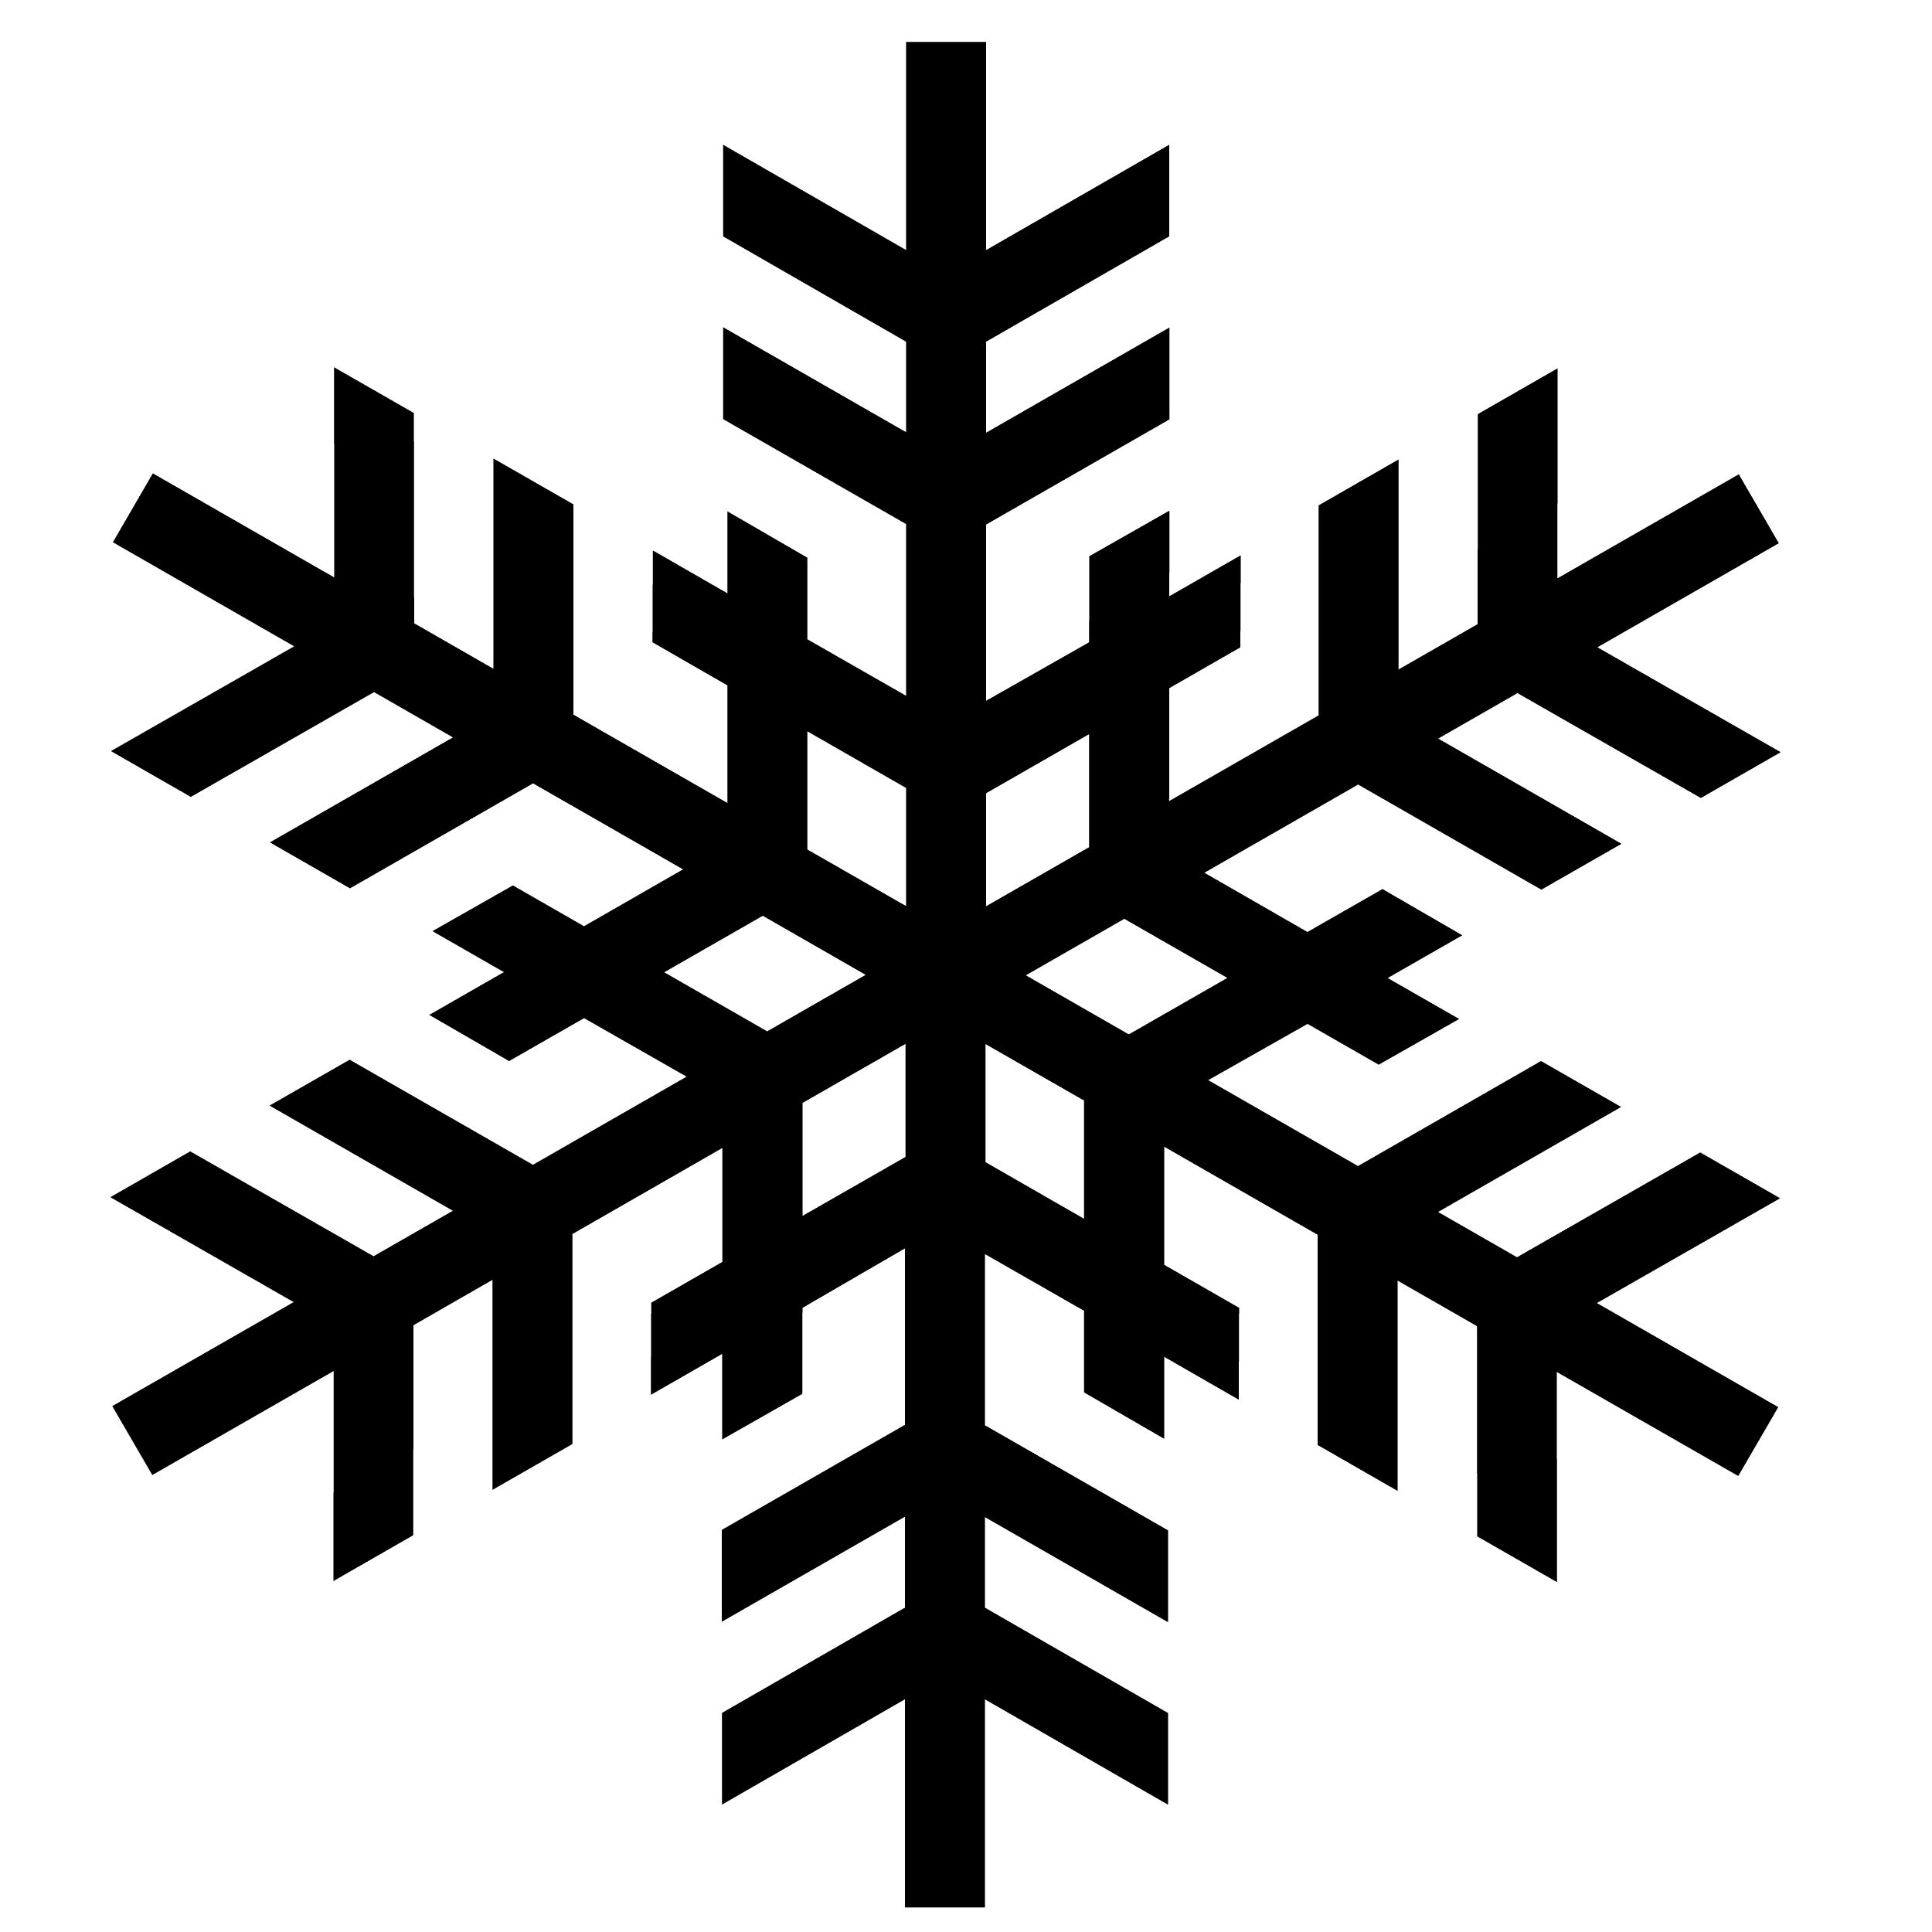 Snowflake Clipart Black And White   Clipart Panda   Free Clipart